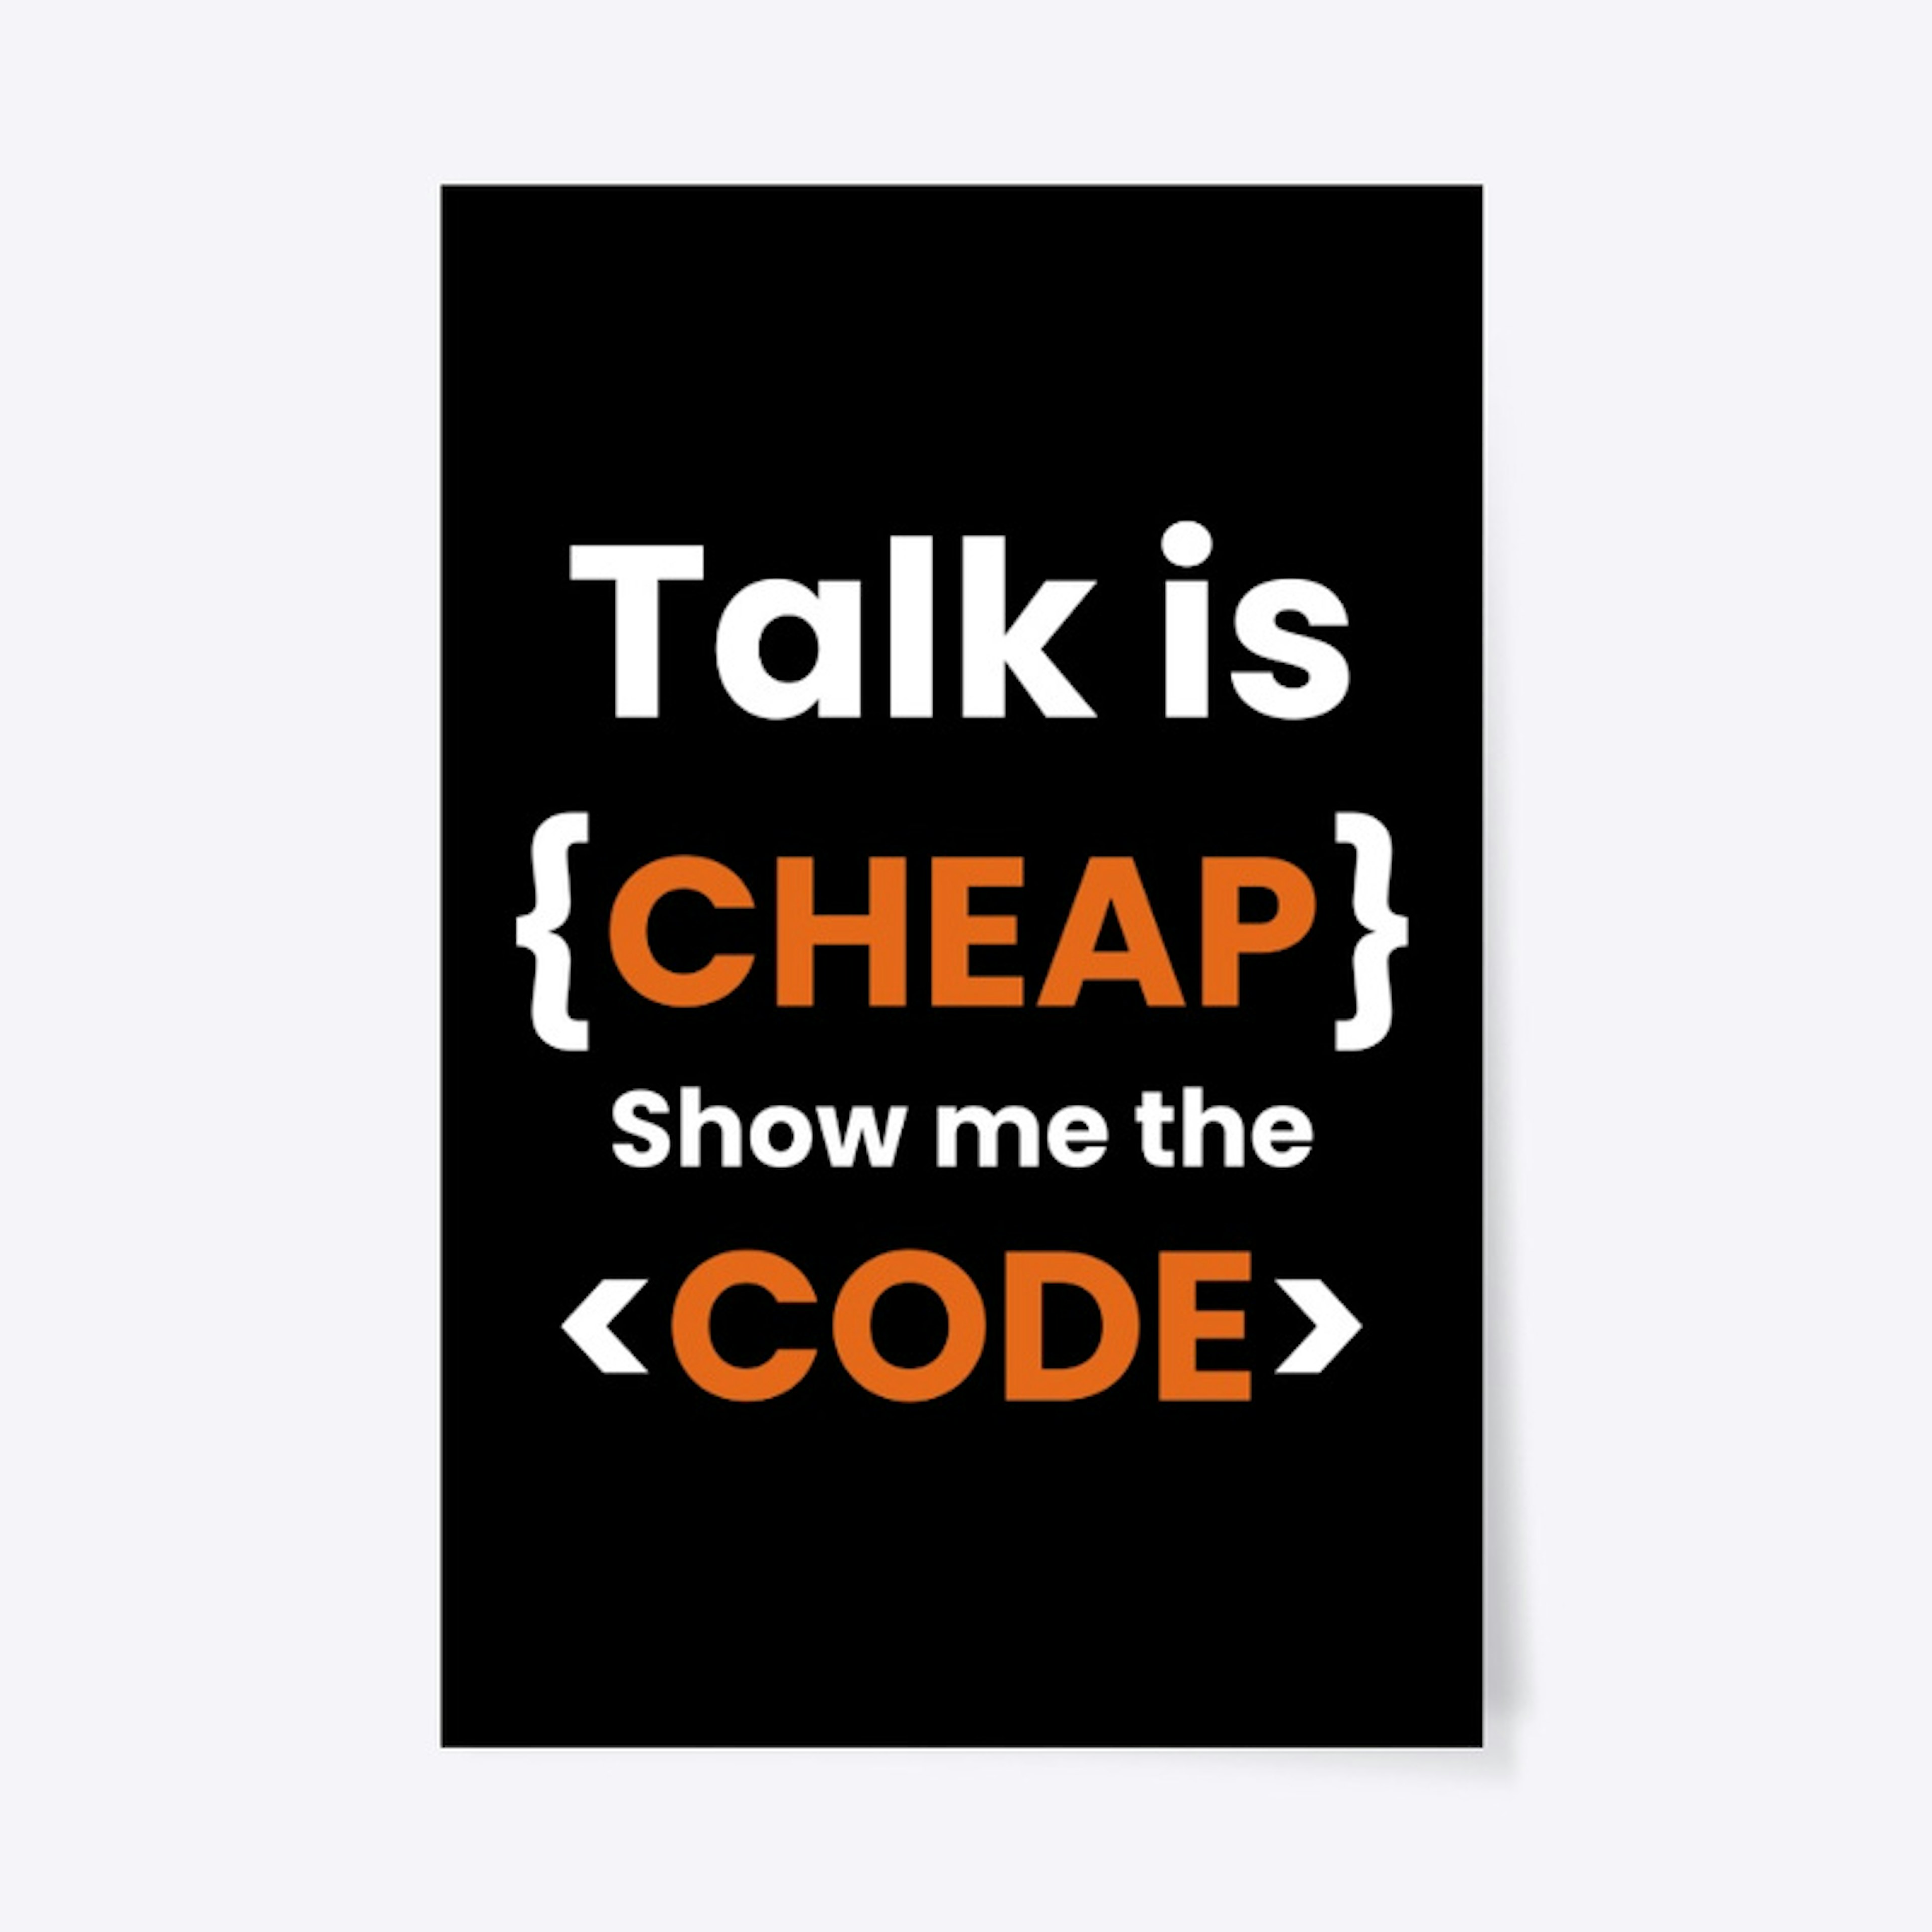 Talk is cheap show me the code